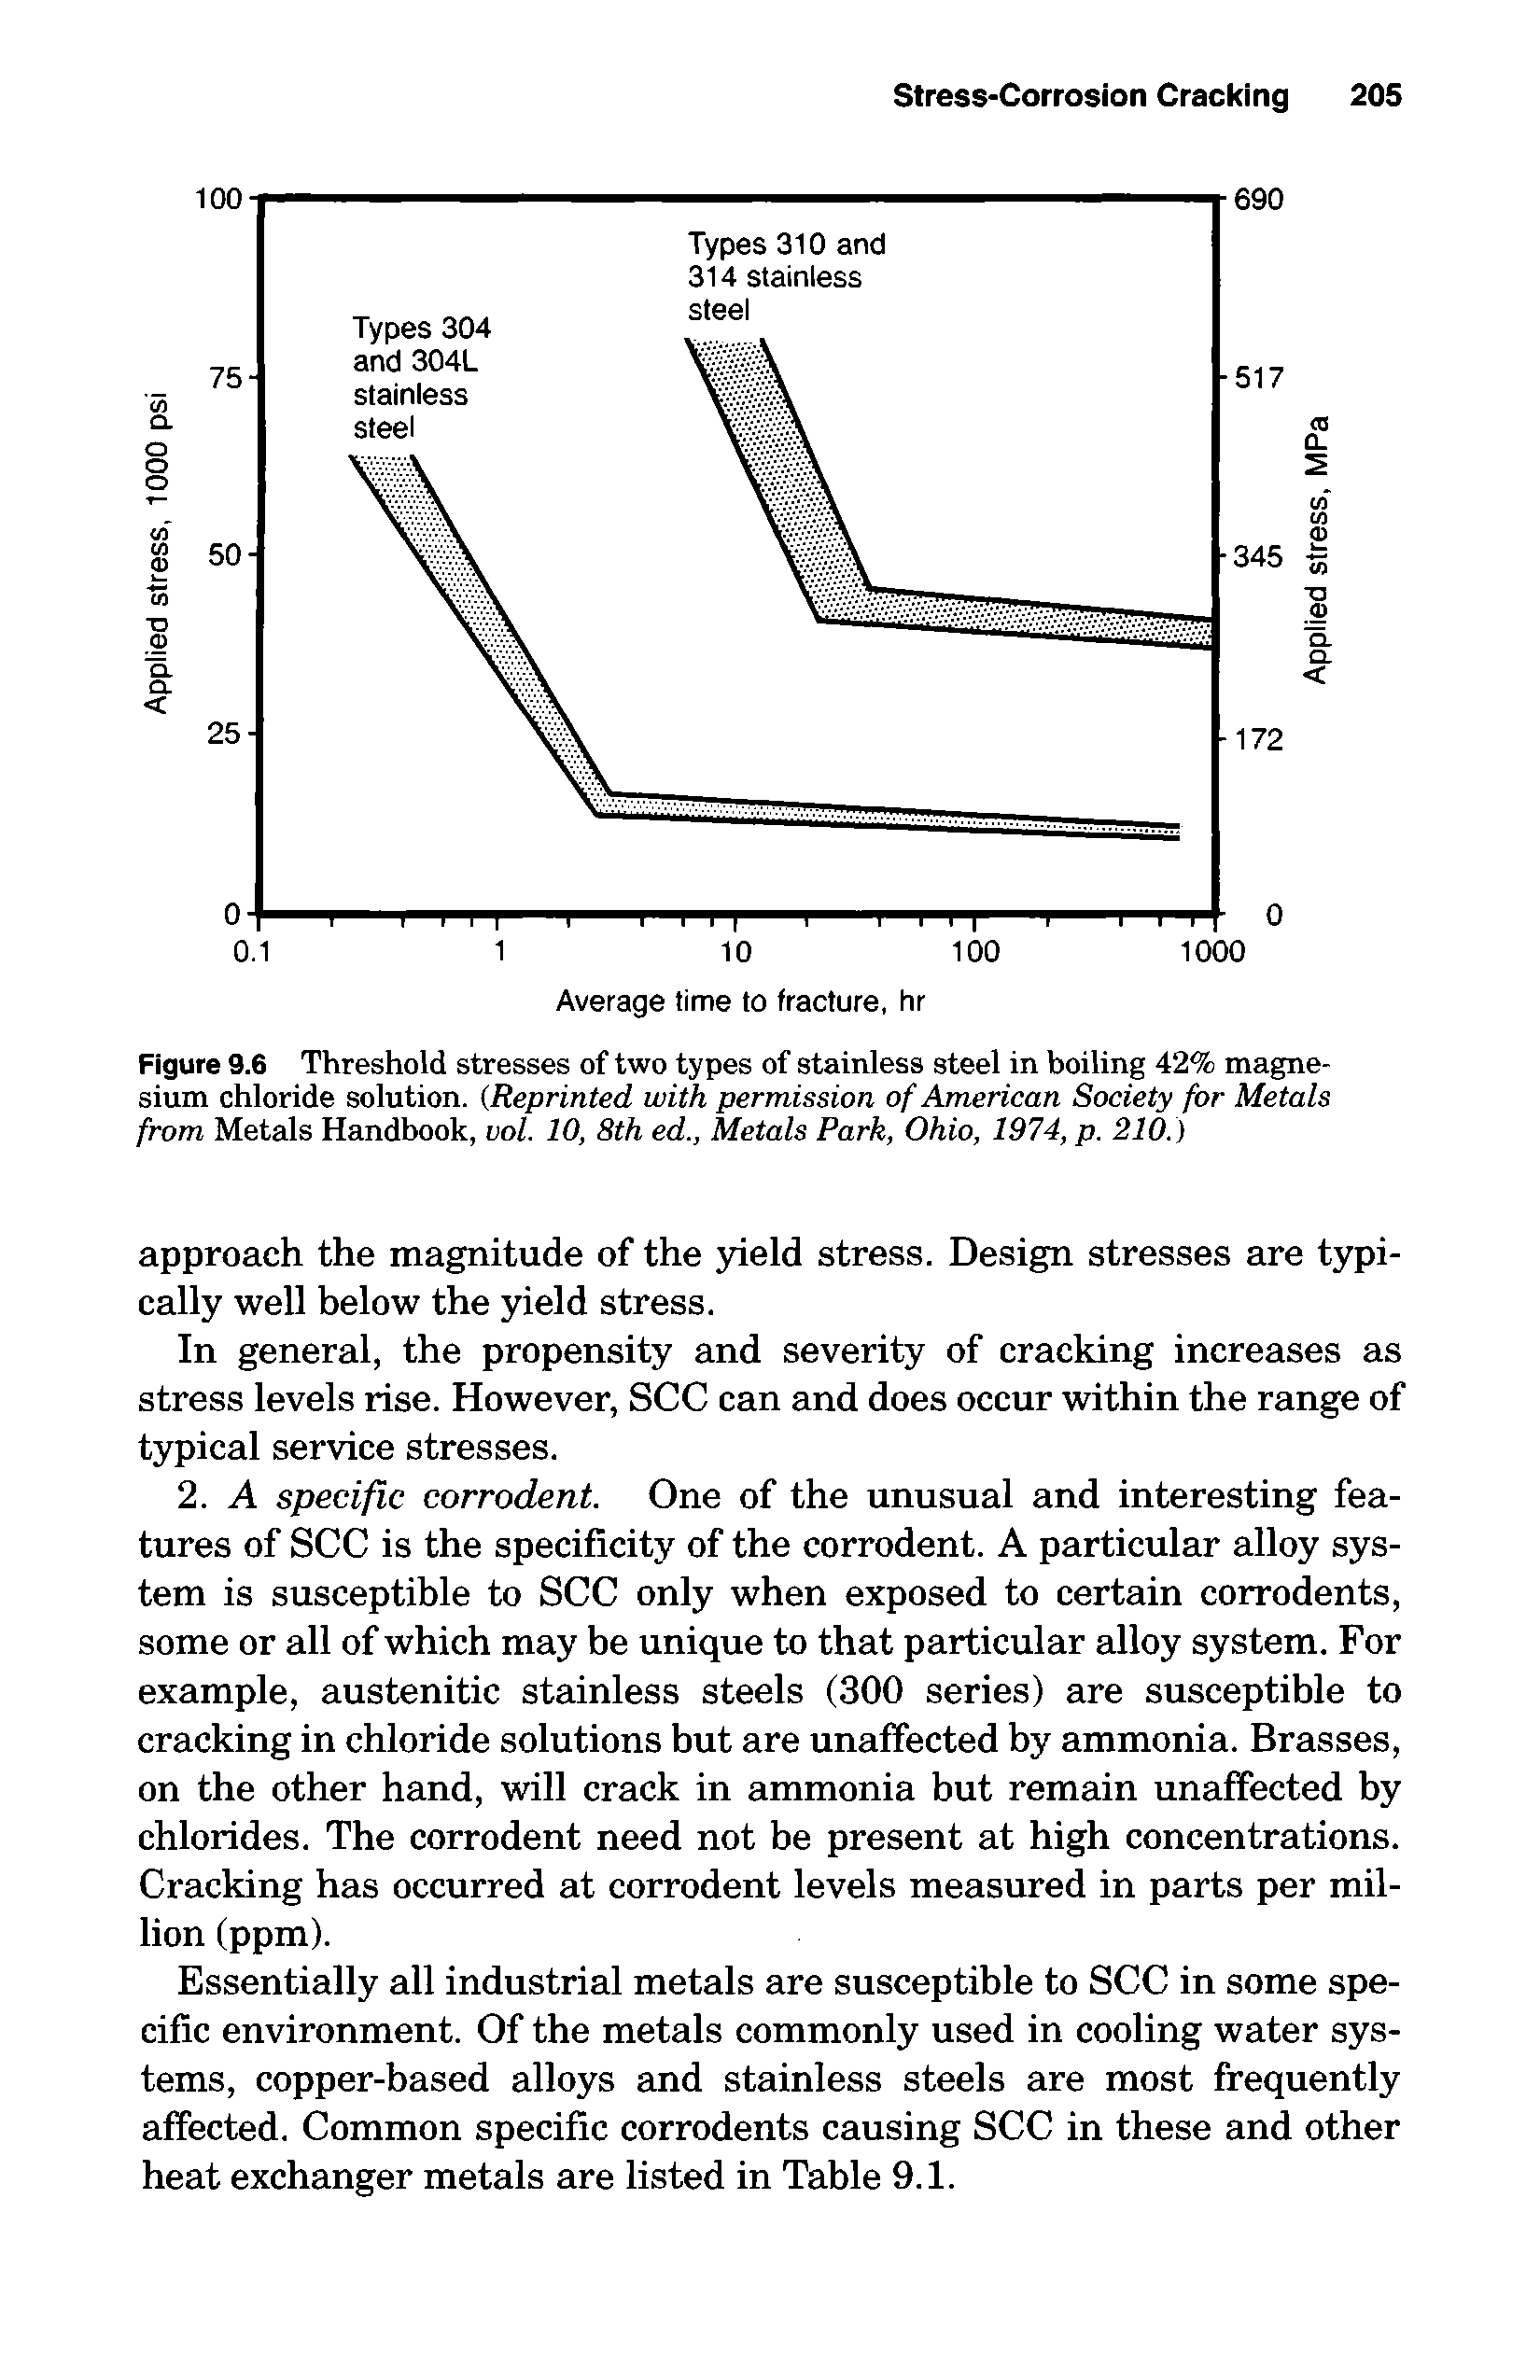 Figure 9.6 Threshold stresses of two types of stainless steel in boiling 42% magnesium chloride solution. Reprinted with permission of American Society for Metals from Metals Handbook, vol. 10, 8th ed., Metals Park, Ohio, 1974, p. 210.)...